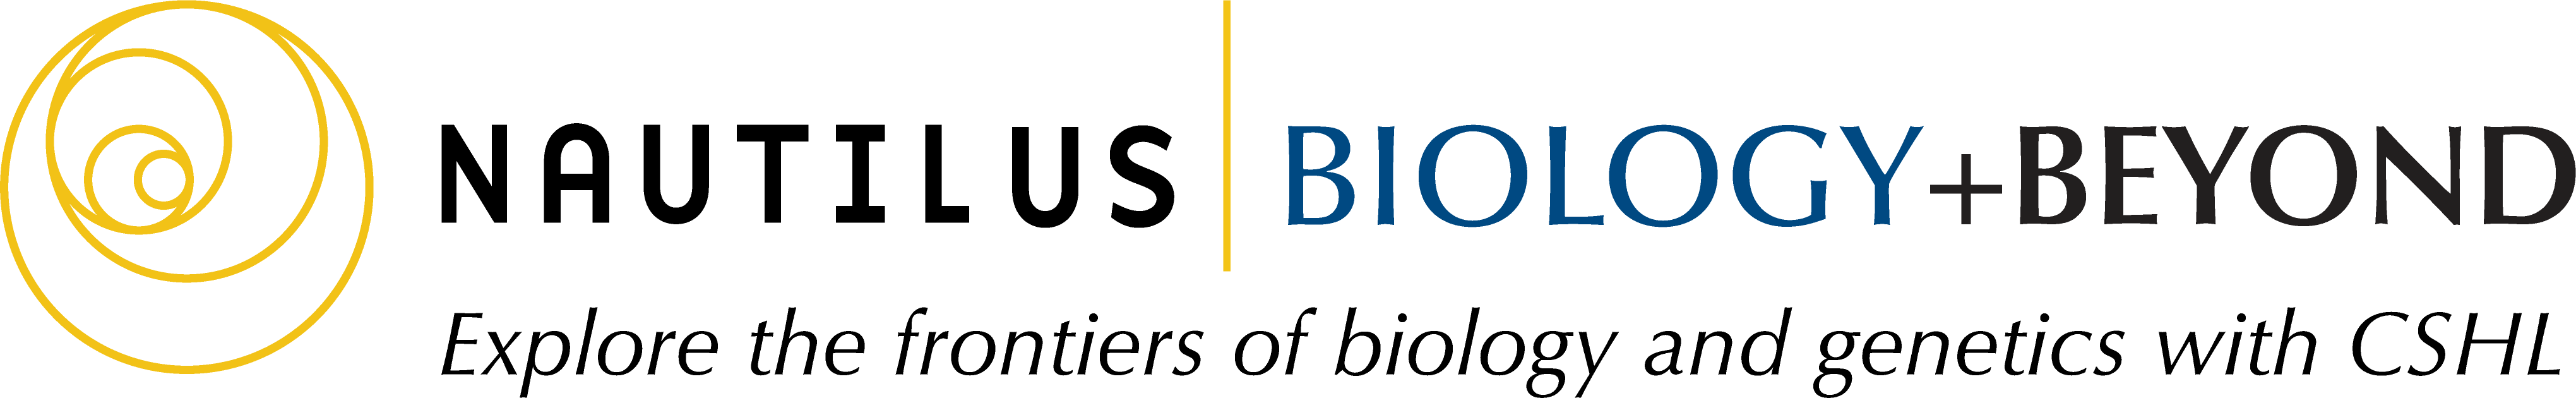 image of Nautilus Biology and Beyond channel logo